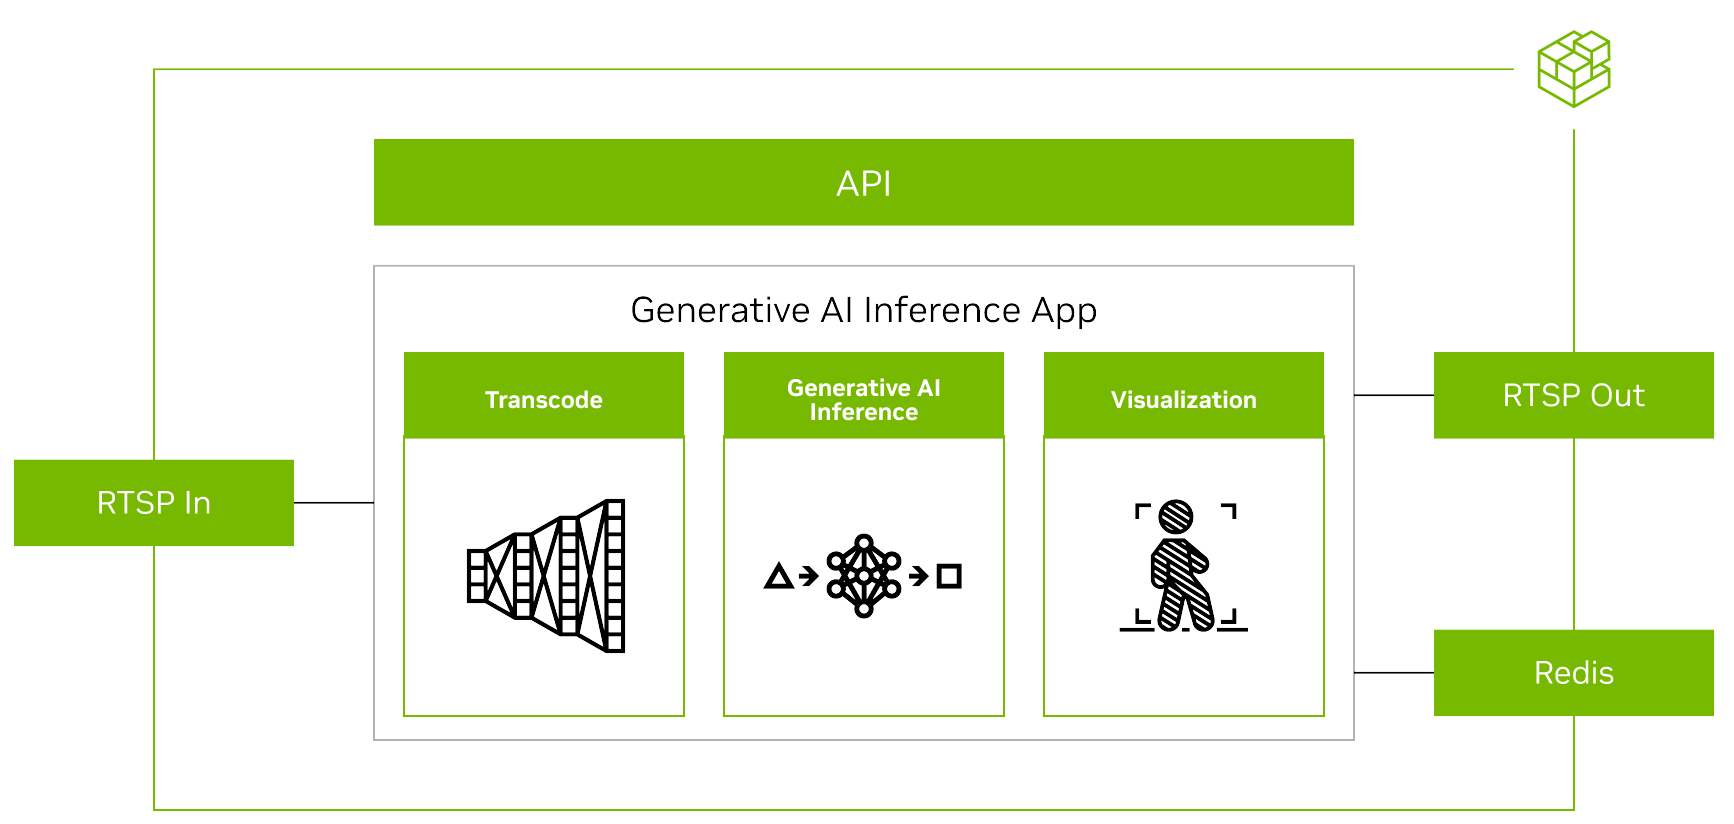 The diagram shows how a generative AI application can take in an RTSP stream and output detection information to RTSP and Redis.